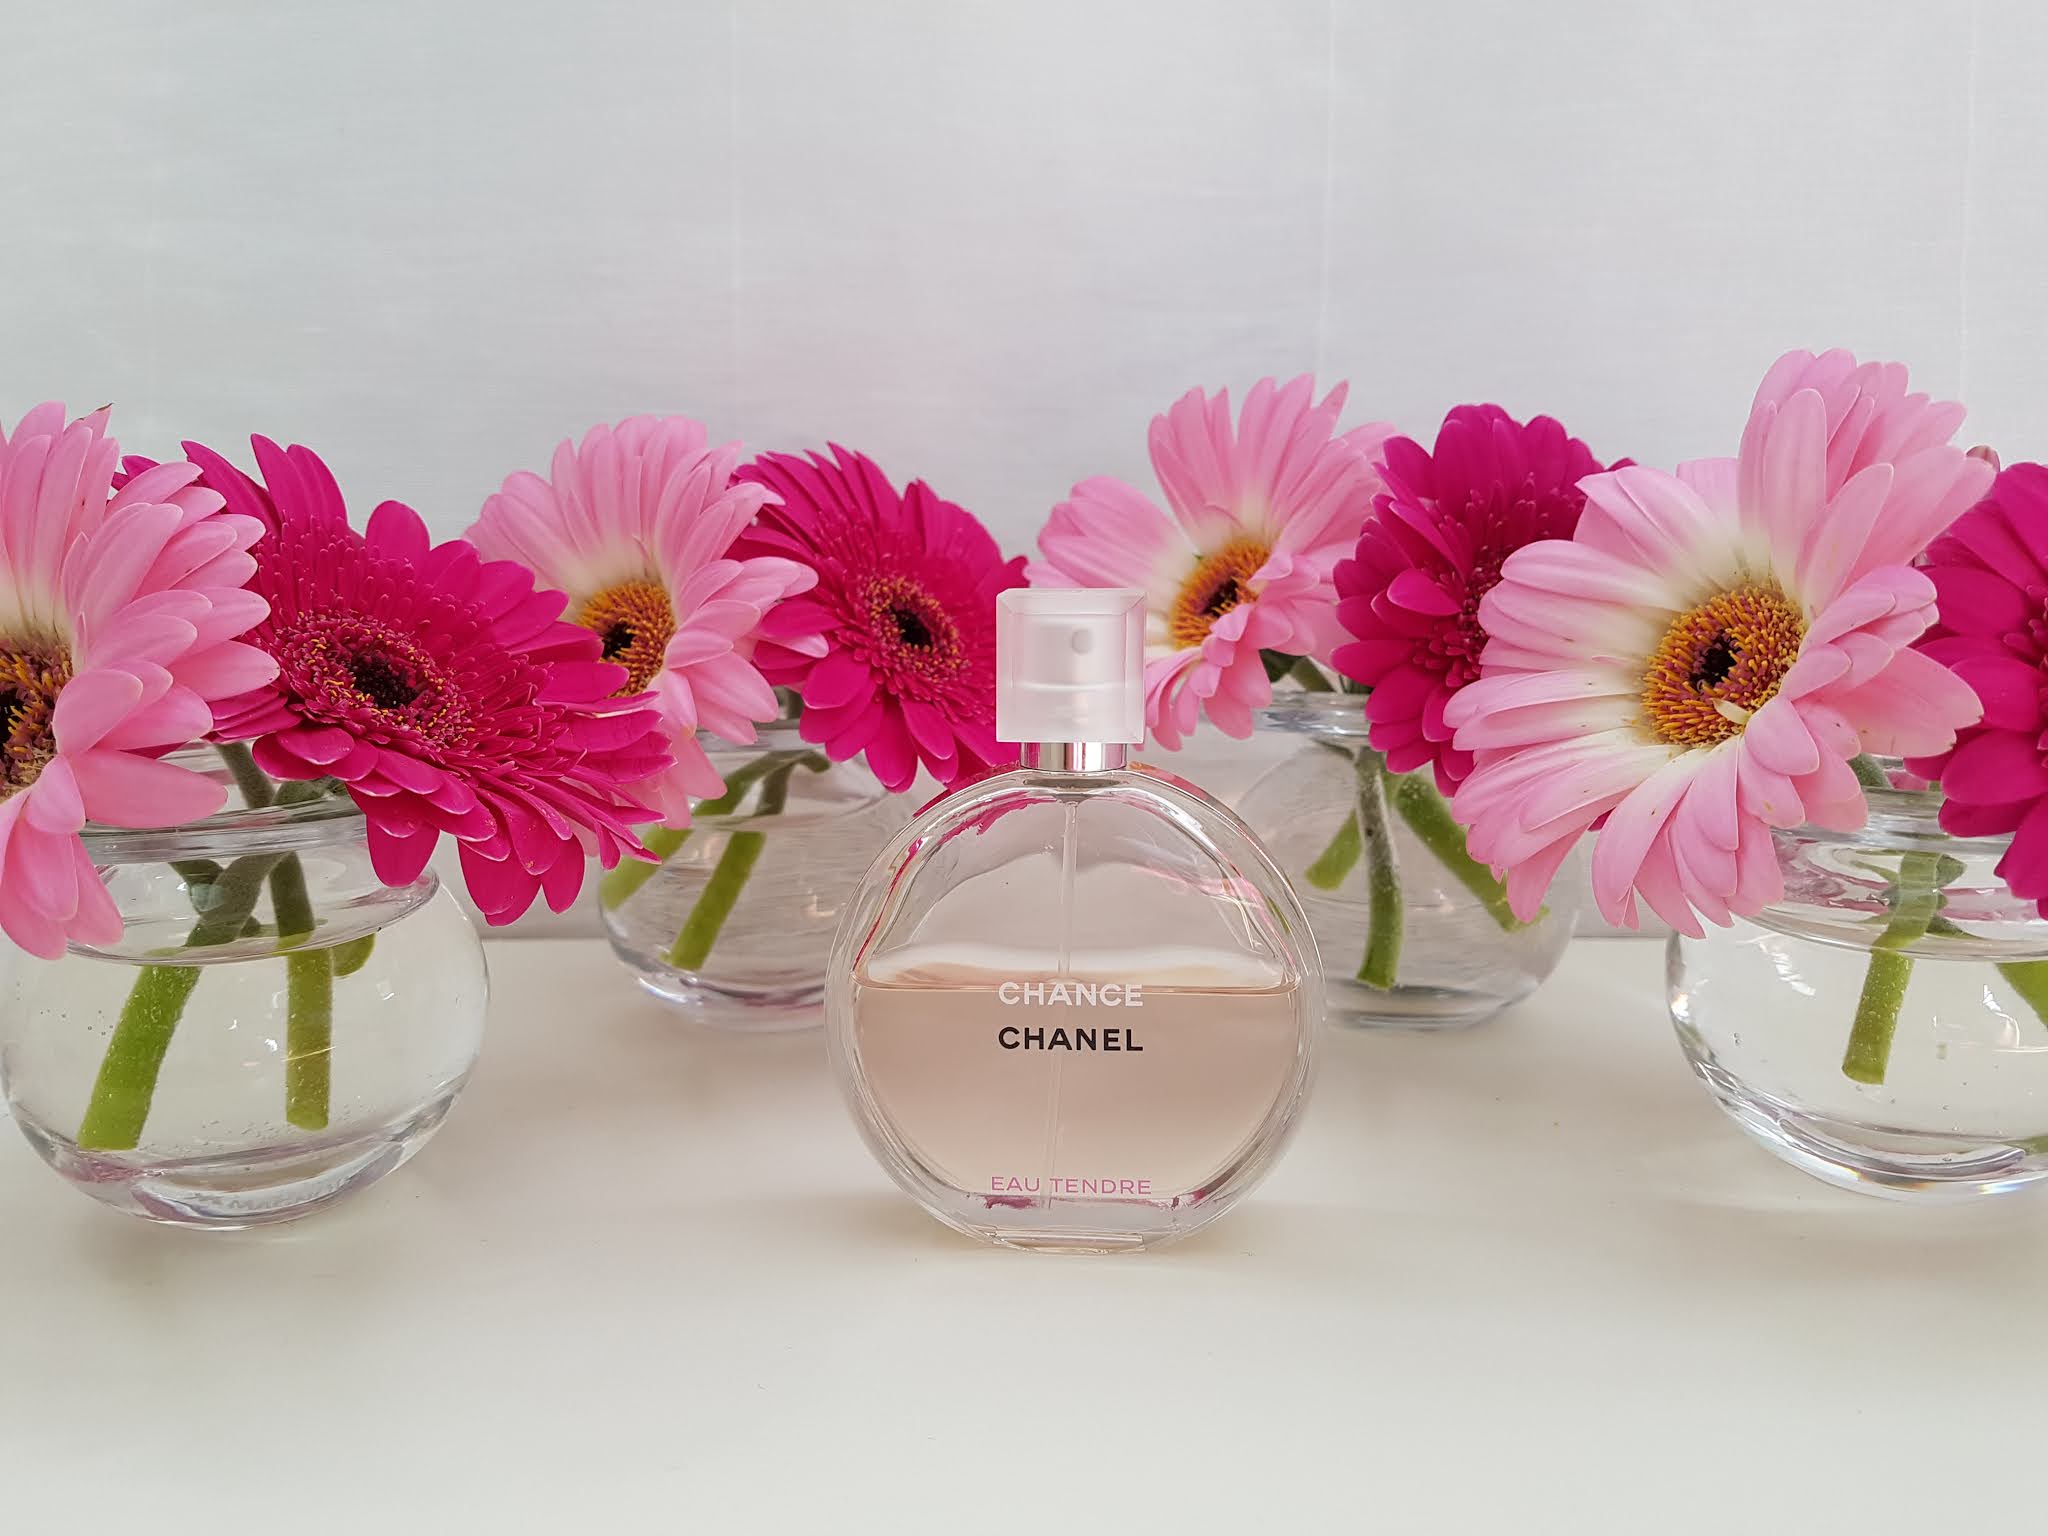 Chanel launches the Chance Eau Tendre Scented Bath Tablets - The